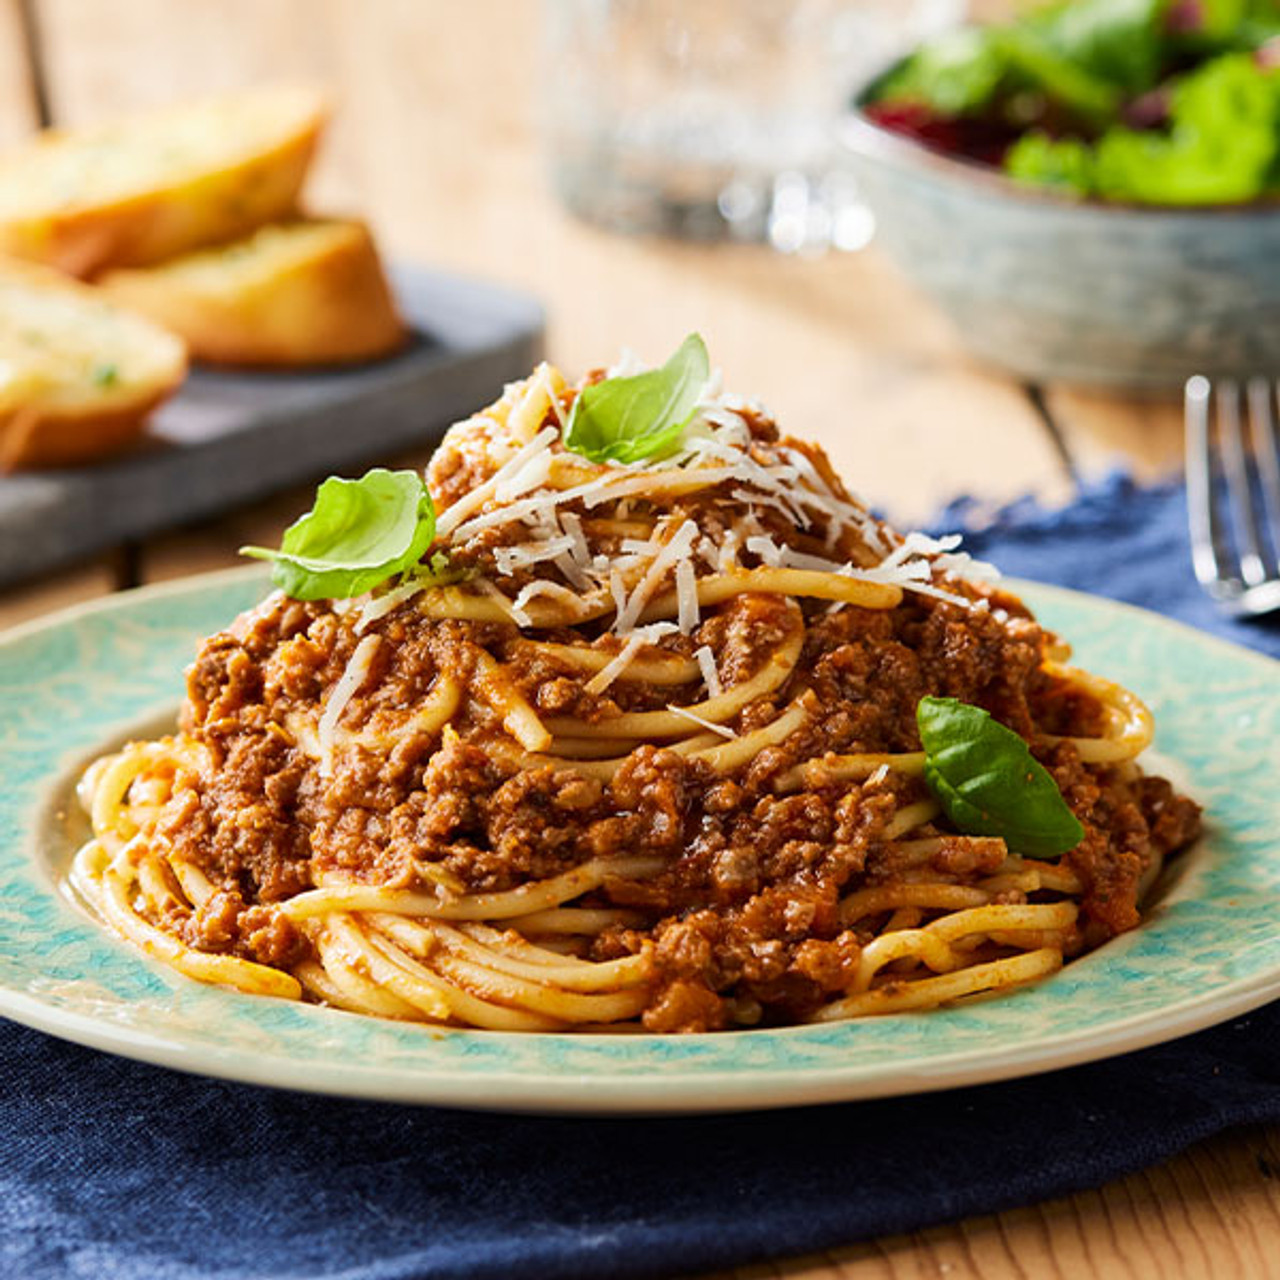 Buy Spaghetti Bolognese Online | Donald Russell